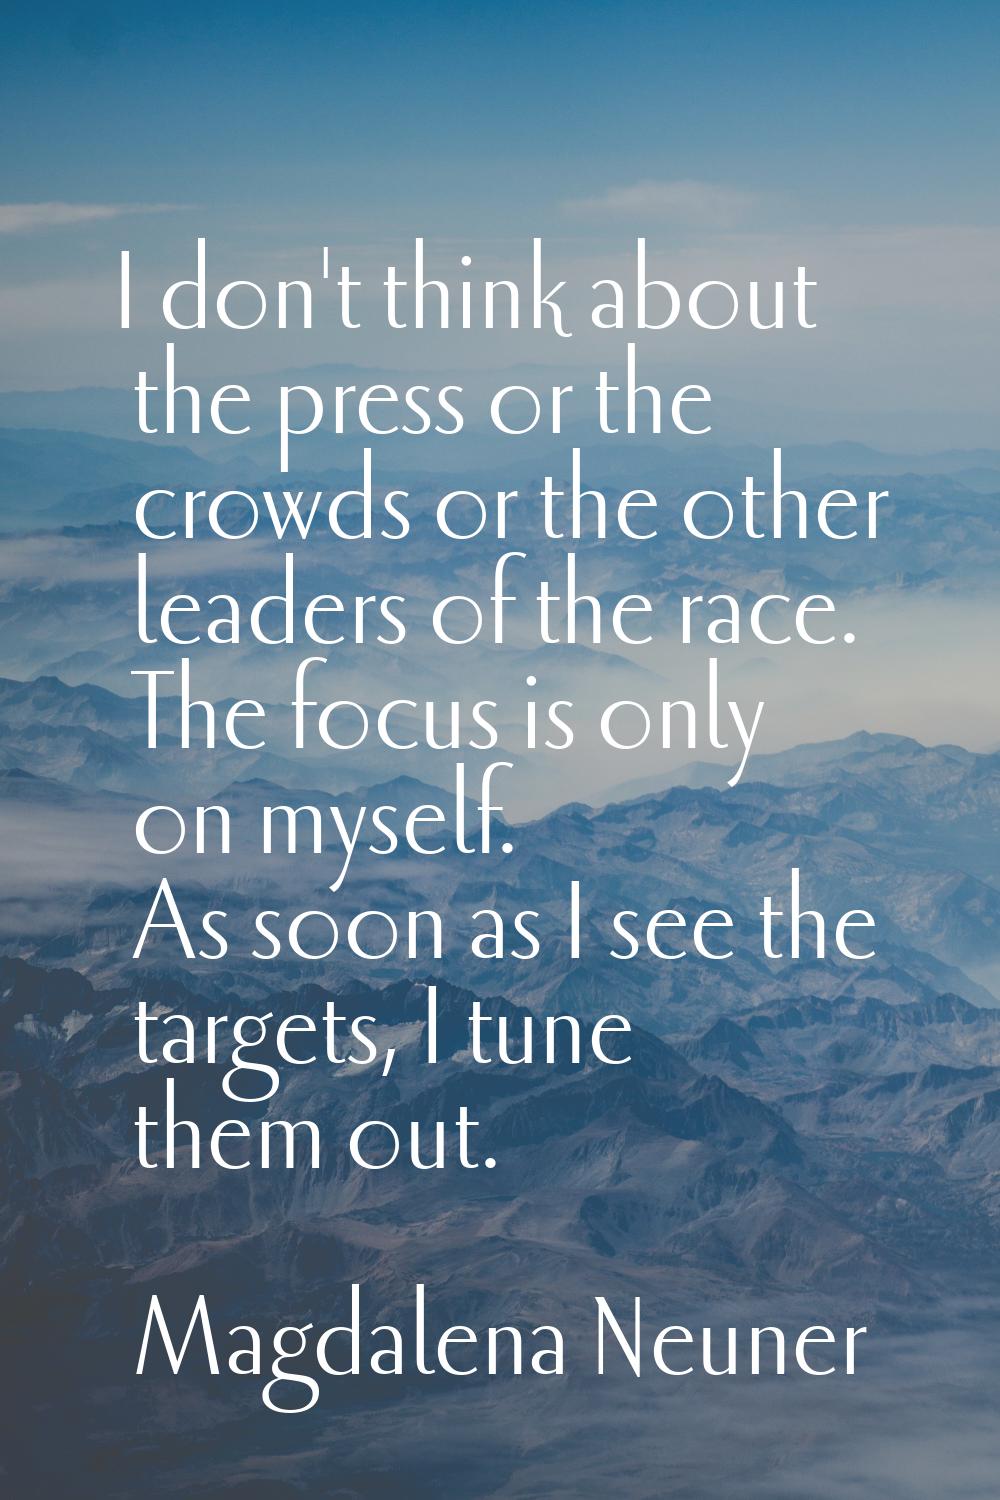 I don't think about the press or the crowds or the other leaders of the race. The focus is only on 